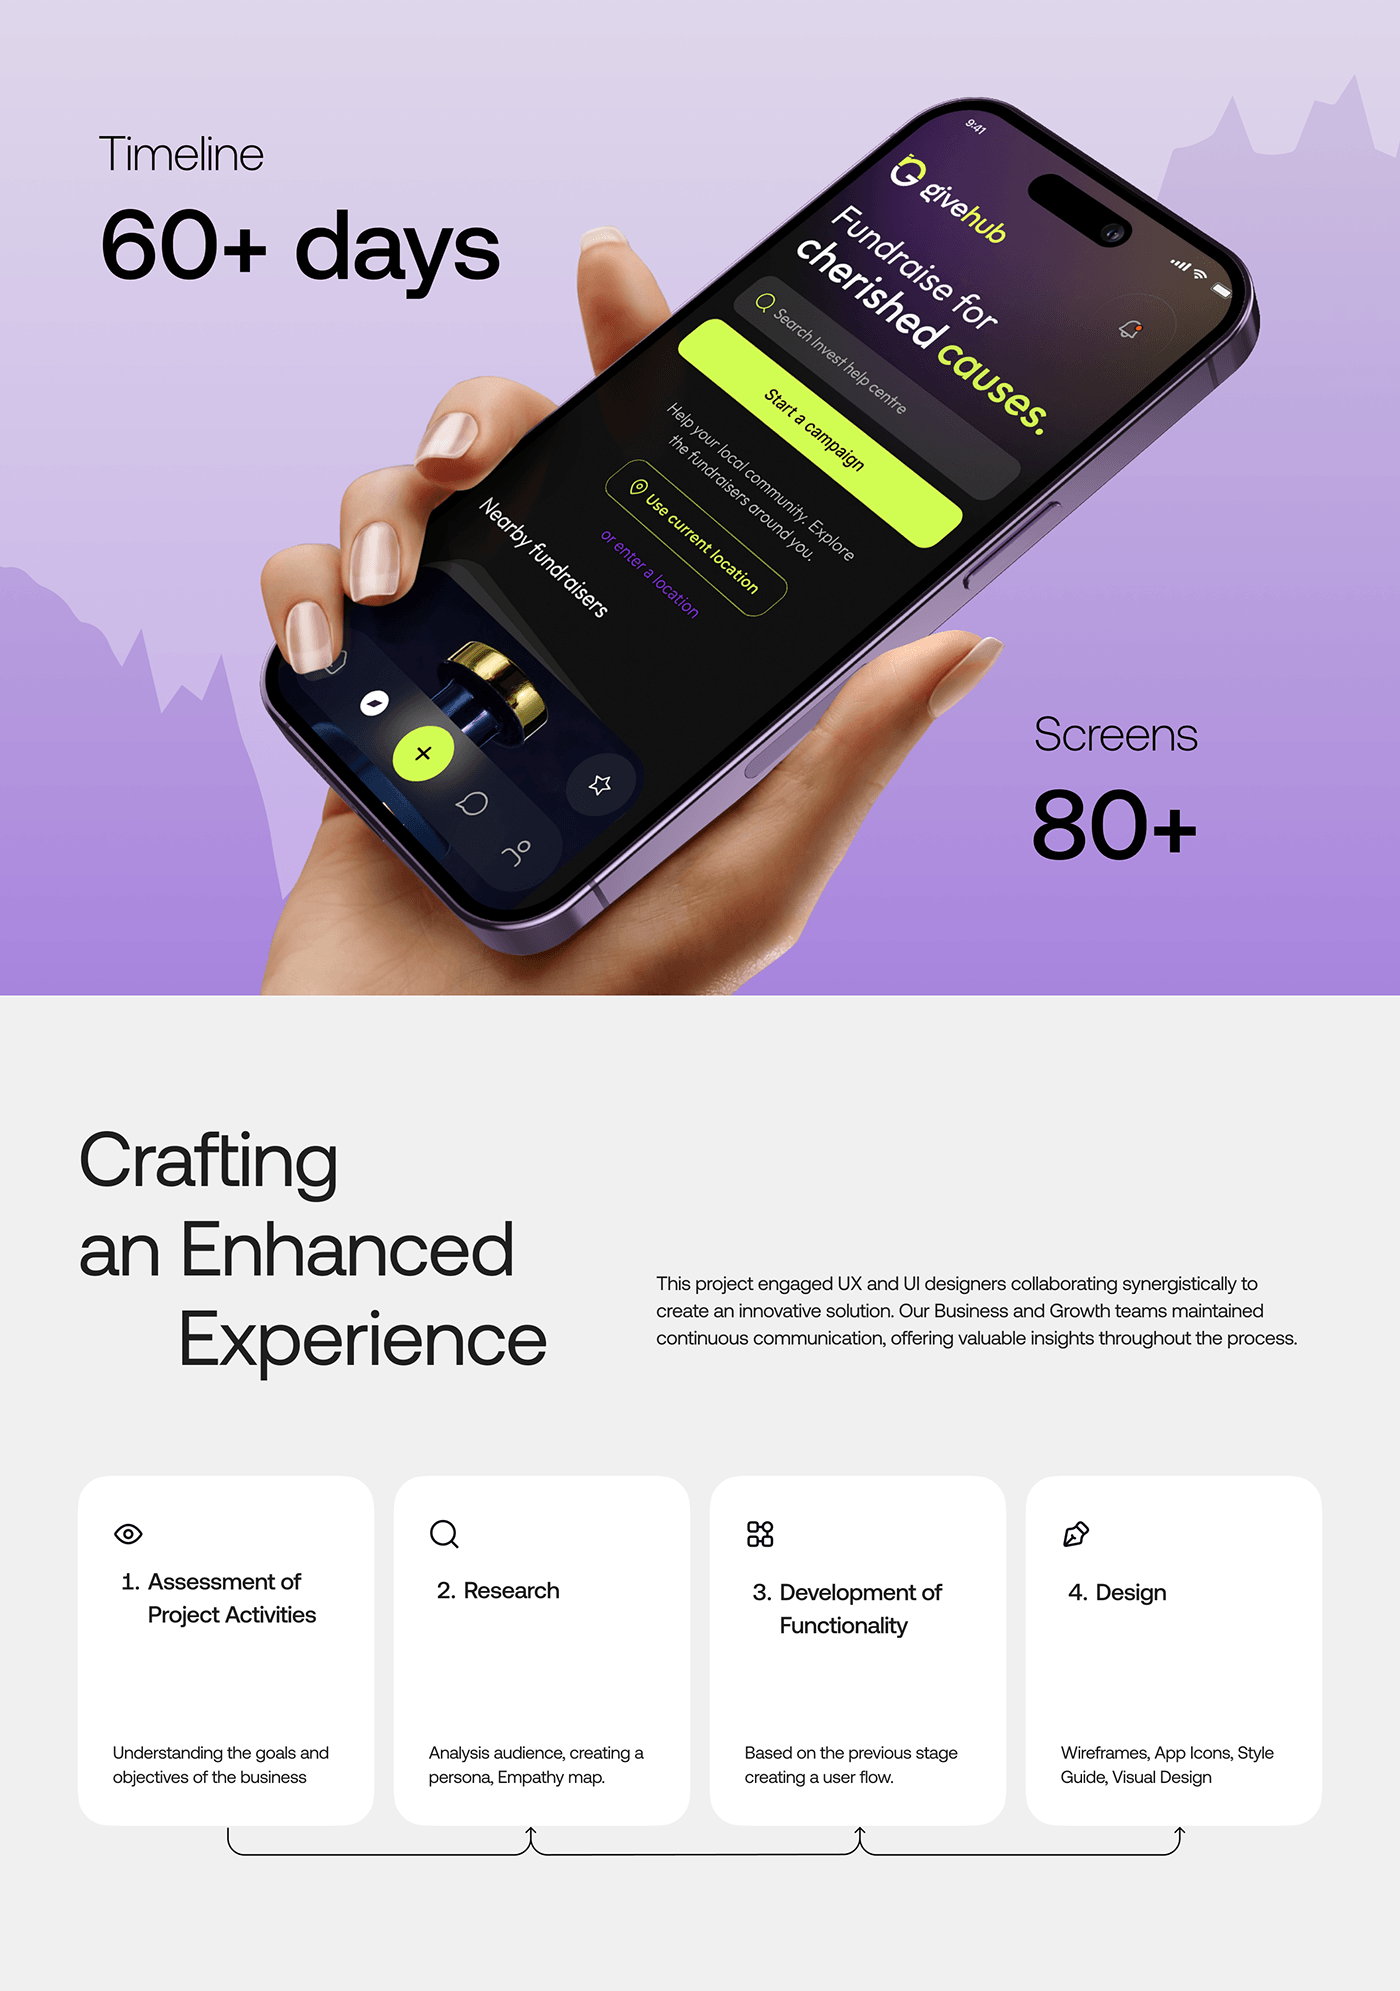 Investment investment app Fintech Startup crypto crowdfunding app UI/UX app design Figma UX Case Study